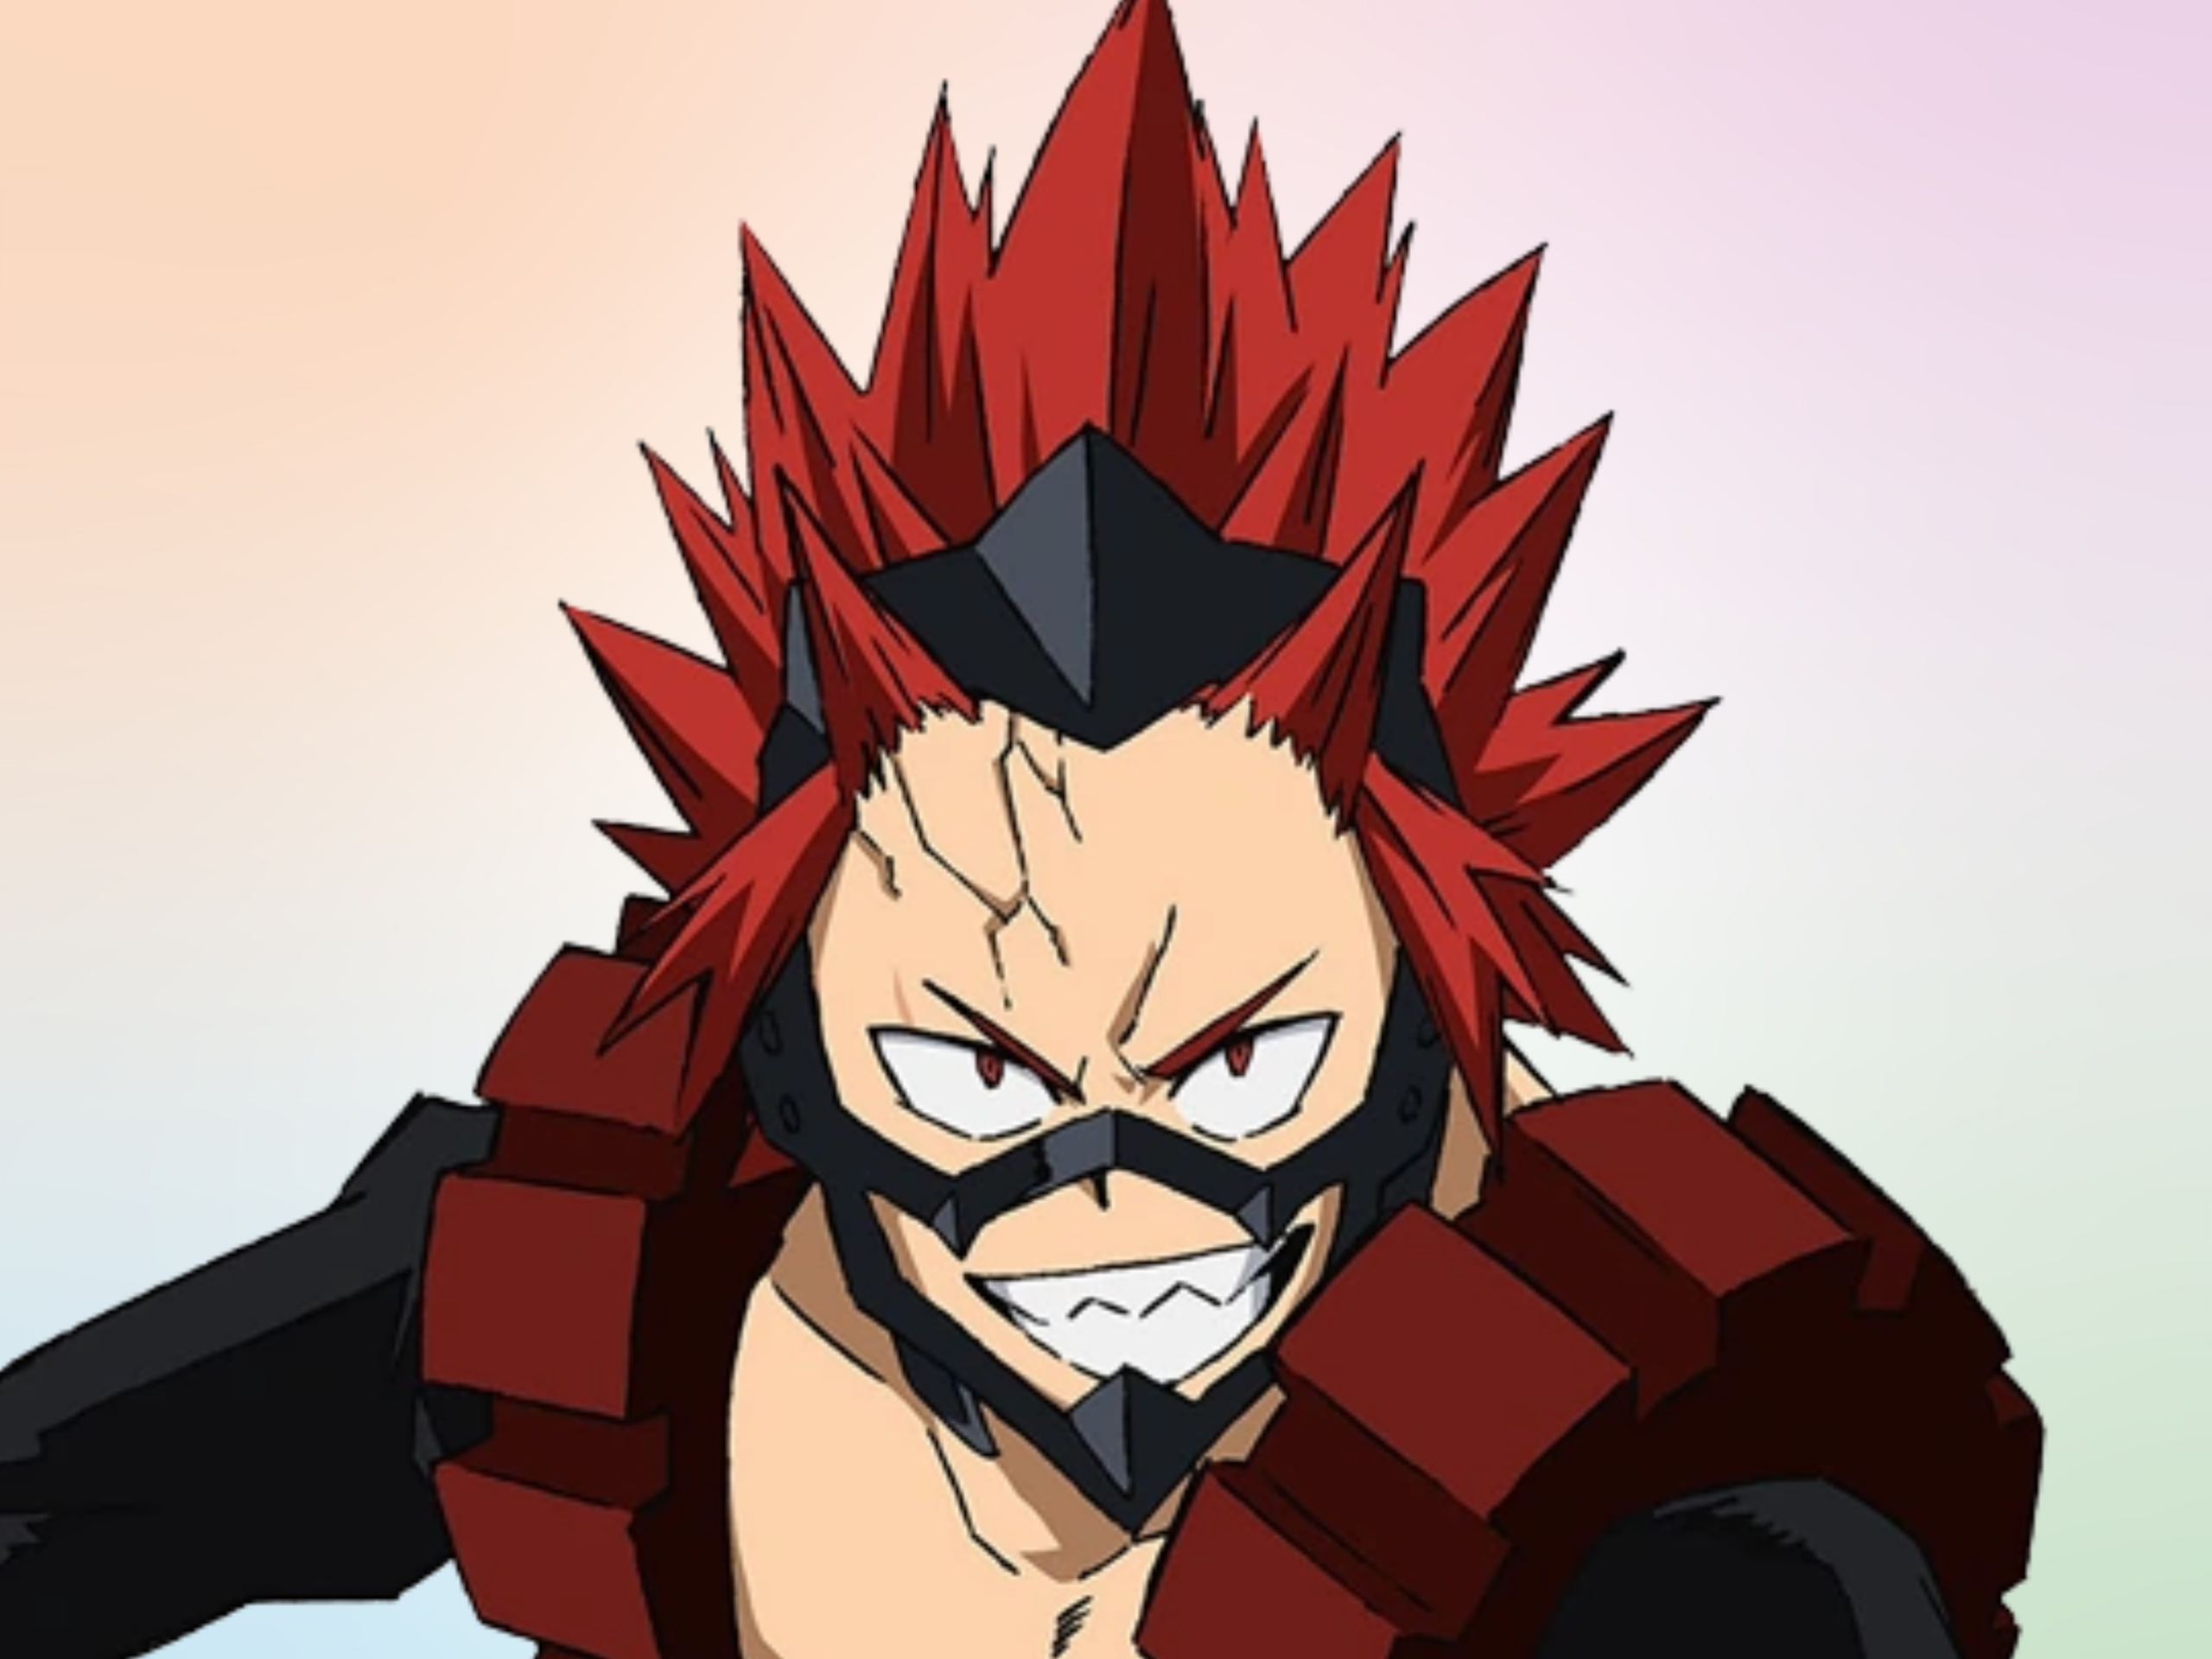 I just got result 'Eijiro kirishima' on quiz 'Which My Hero Academia  character are you?'. What will you get?